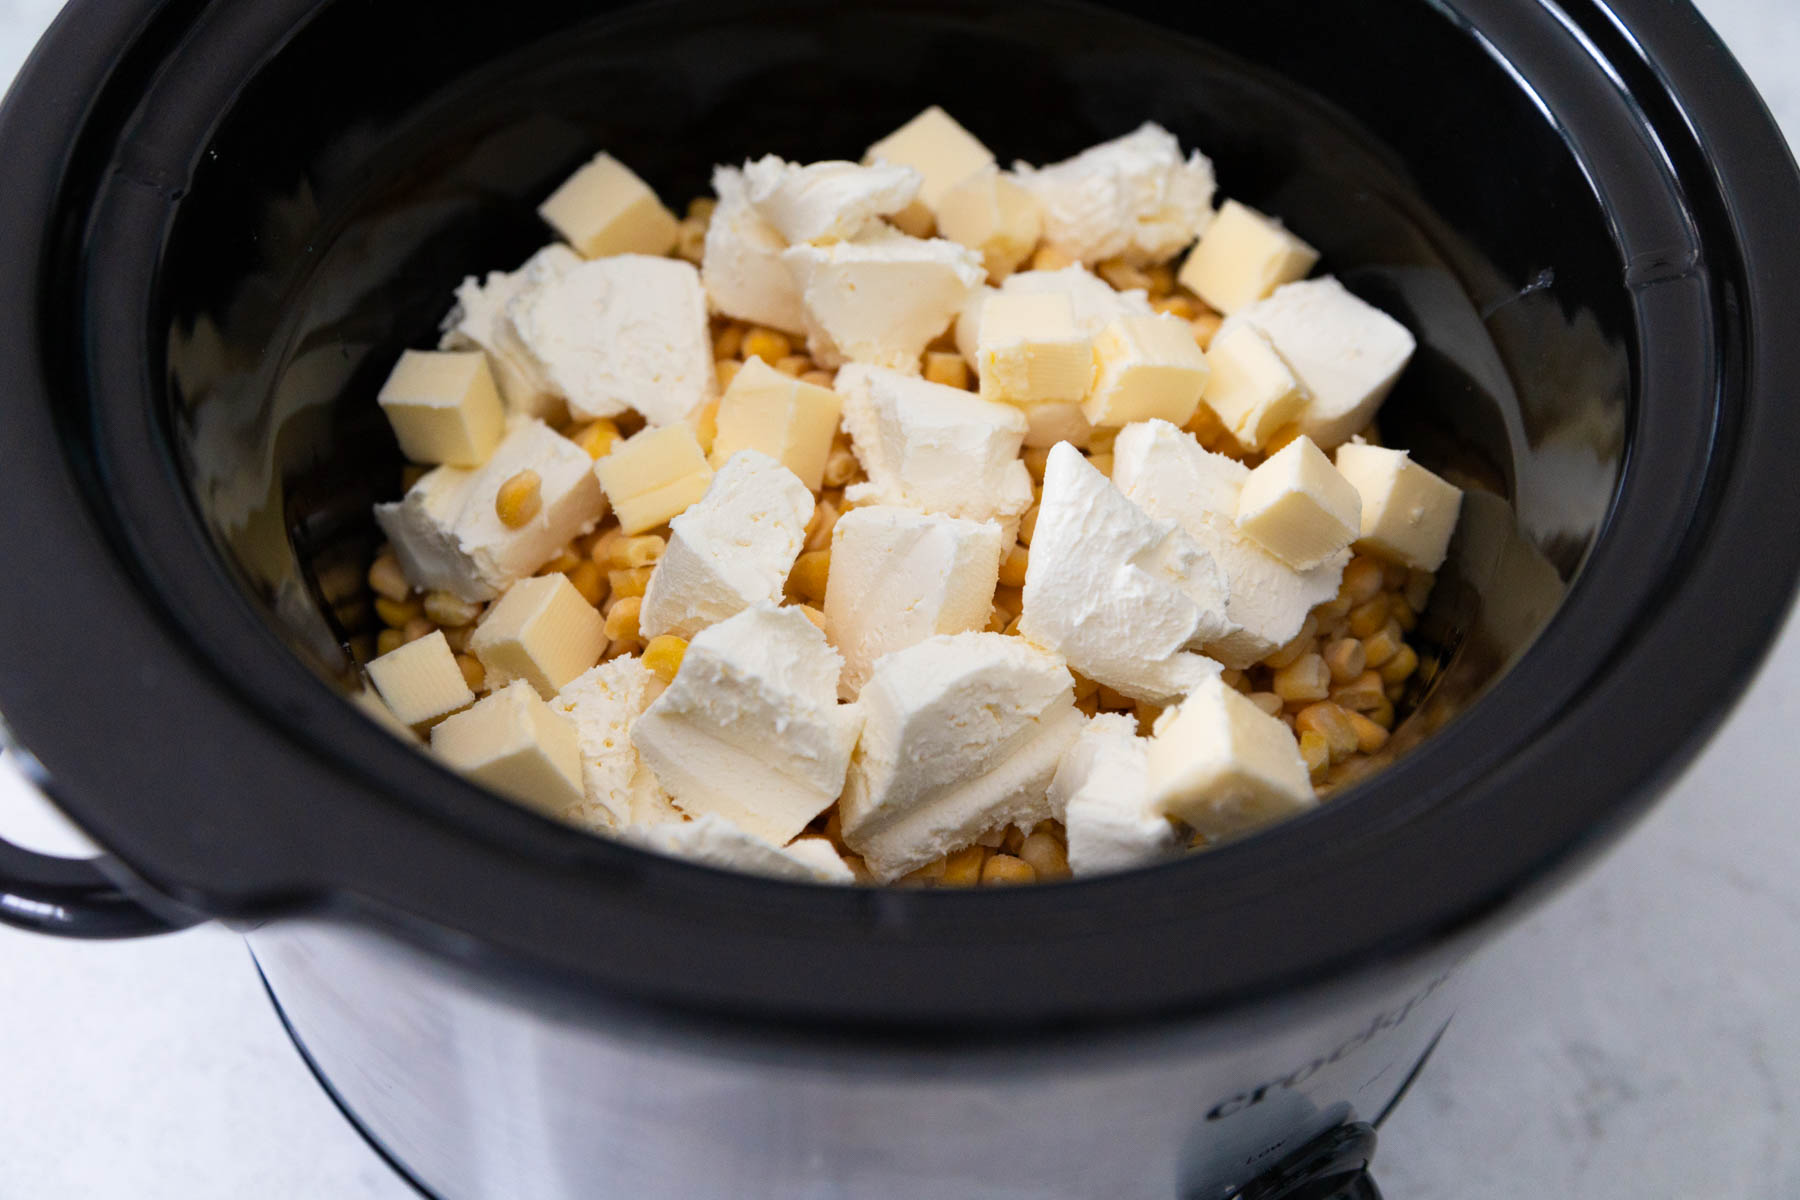 The crock pot bowl is filled with frozen corn and topped with cubes of cream cheese and butter.